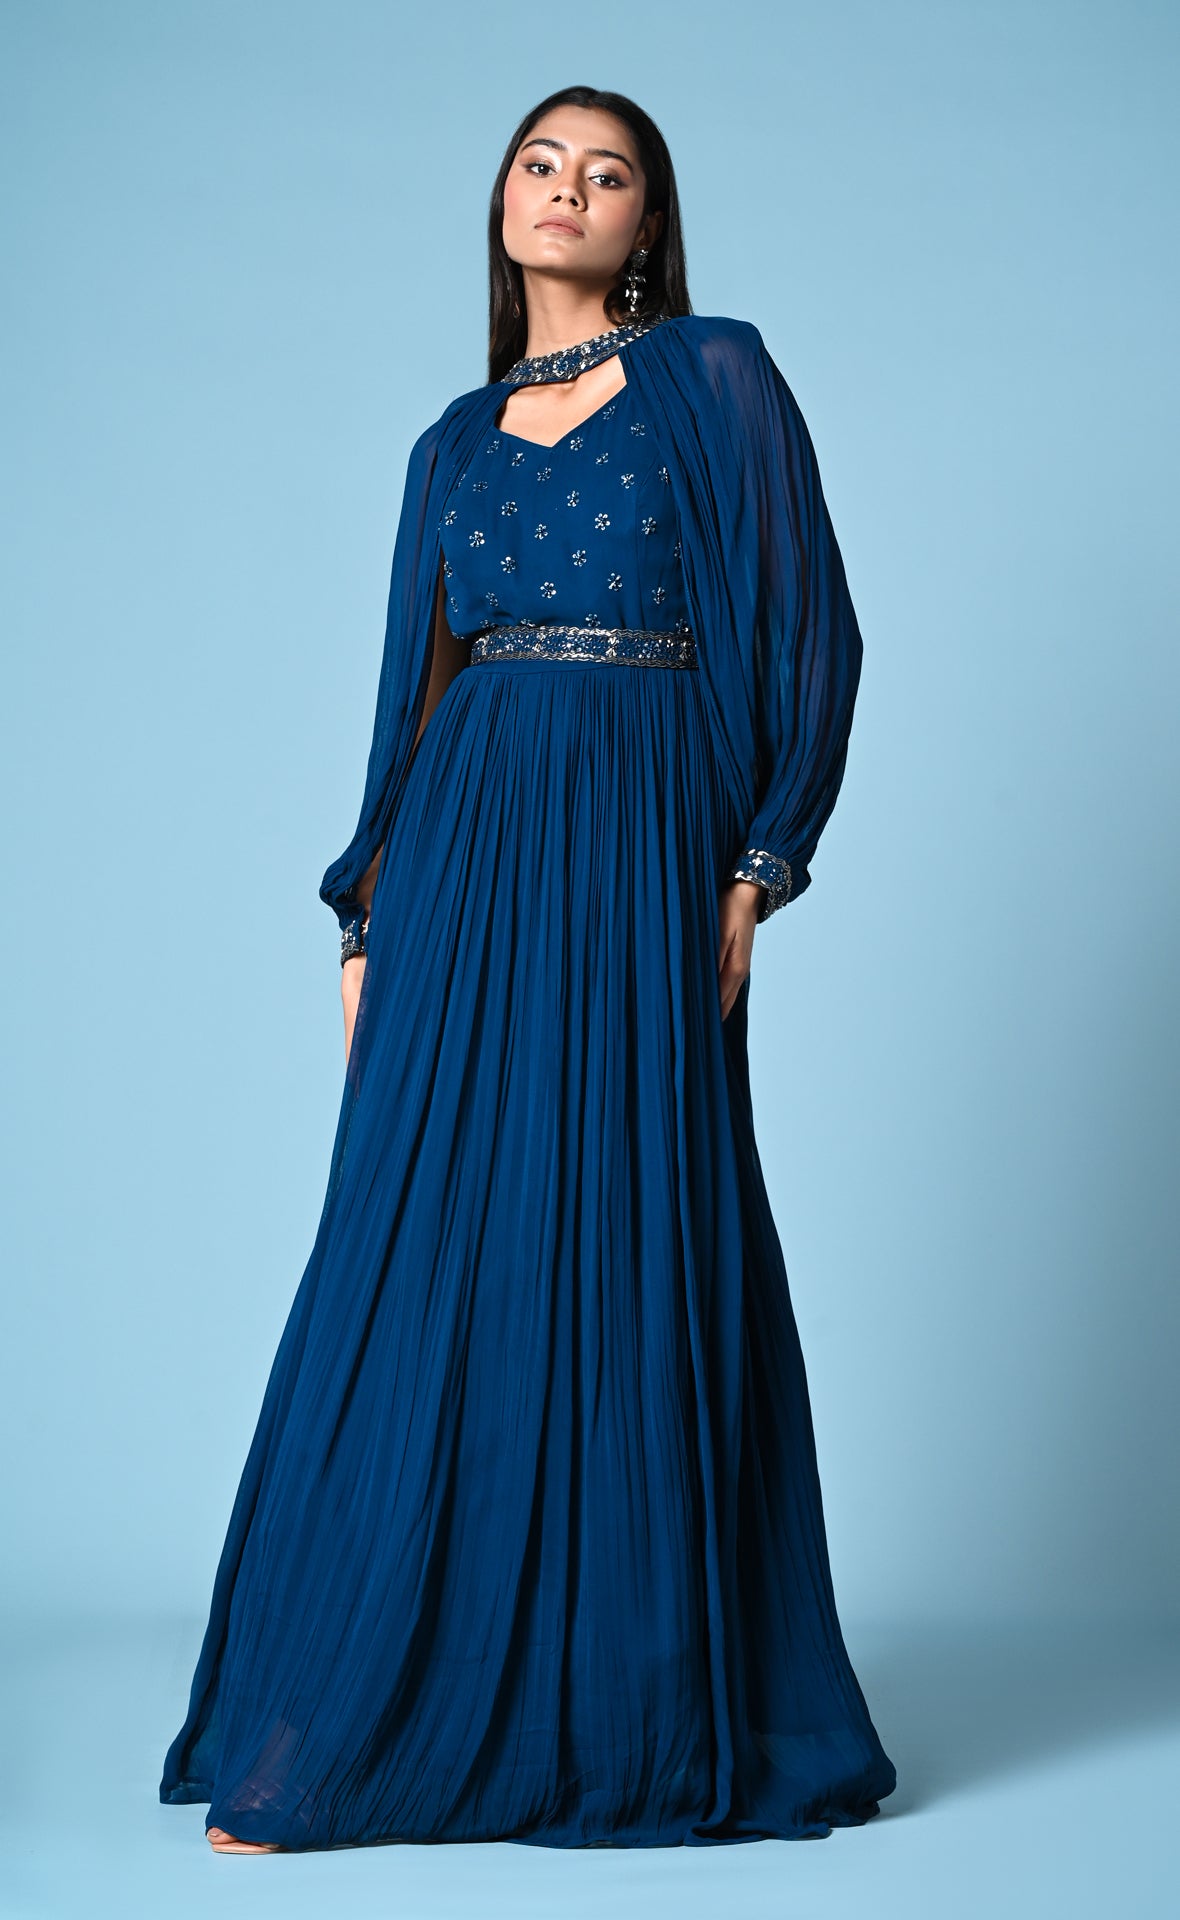 Peacock blue cocktail gown with statement sleeve and hip belt